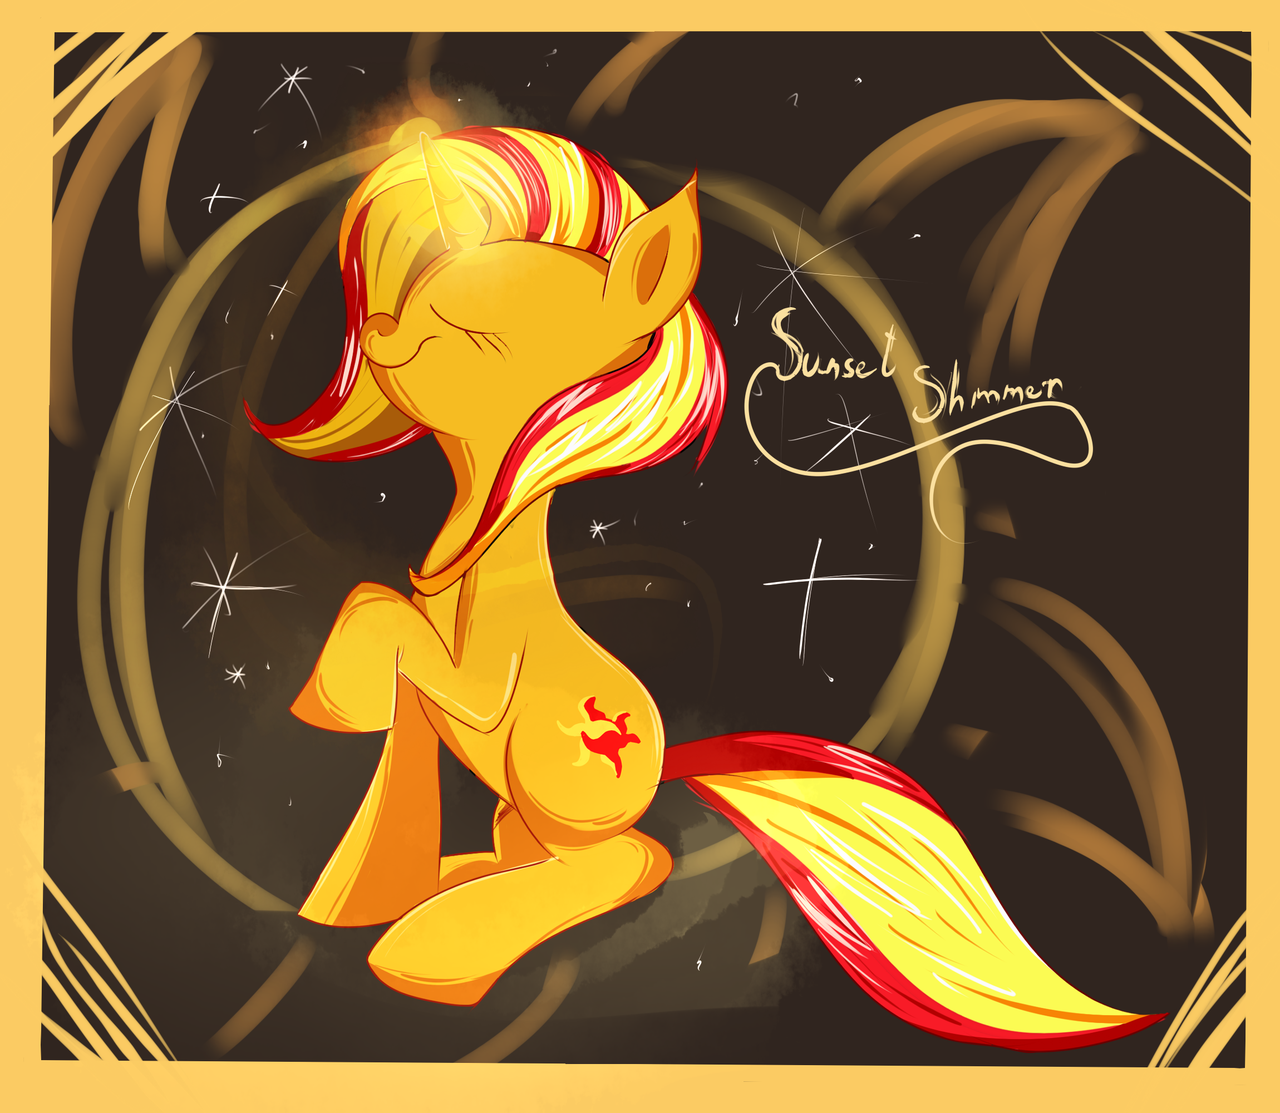 sunset_shimmer_by_vanille913-d5xi27a.png